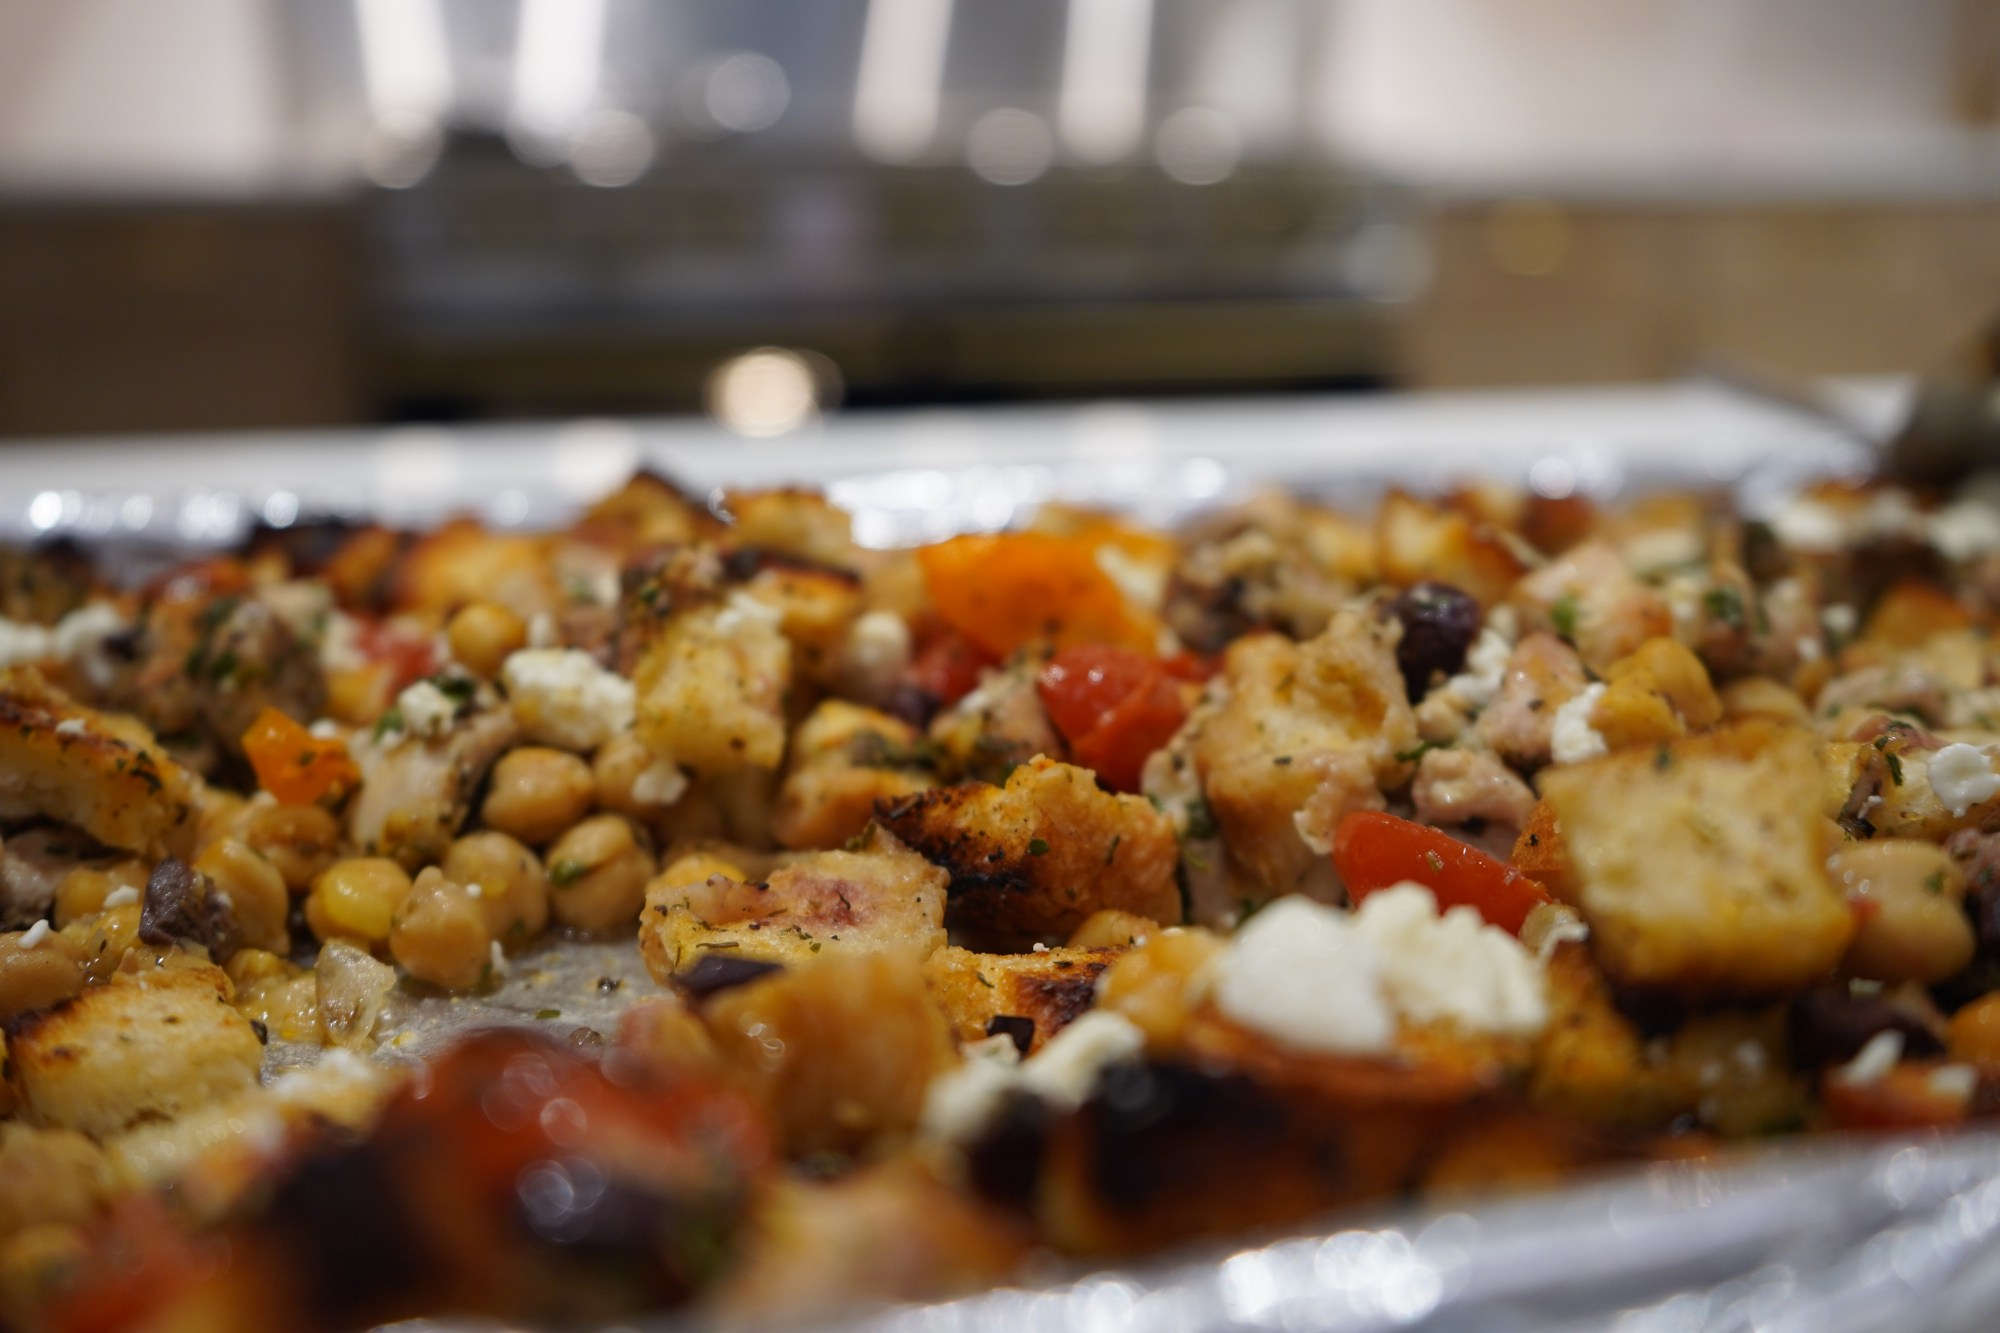 A Tray of Mediterranean-spiced foods: chicken, garbanzo beans and feta.